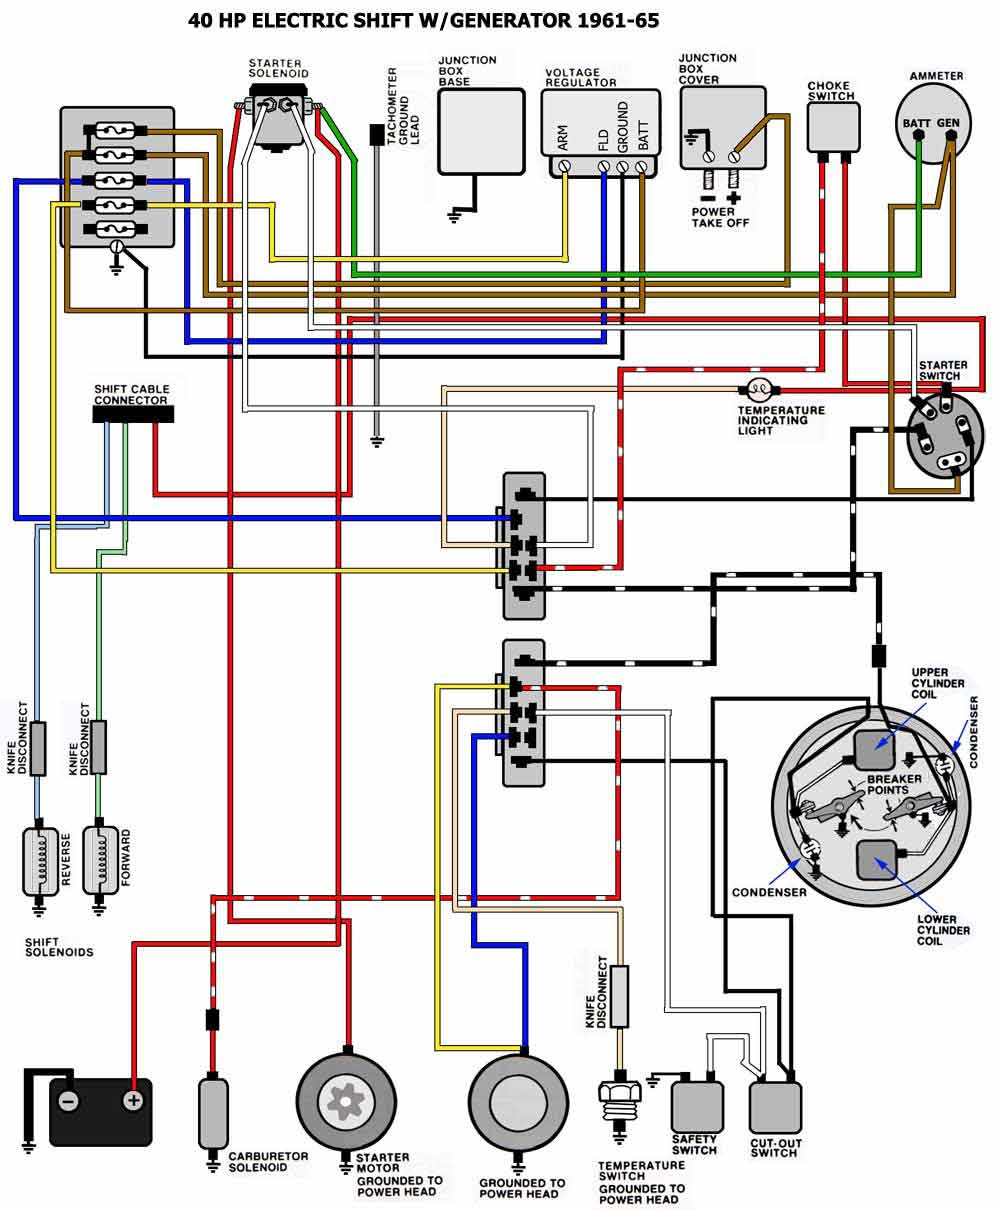 Help With Wiring A Johnson Rdsl-22 40hp Page  1